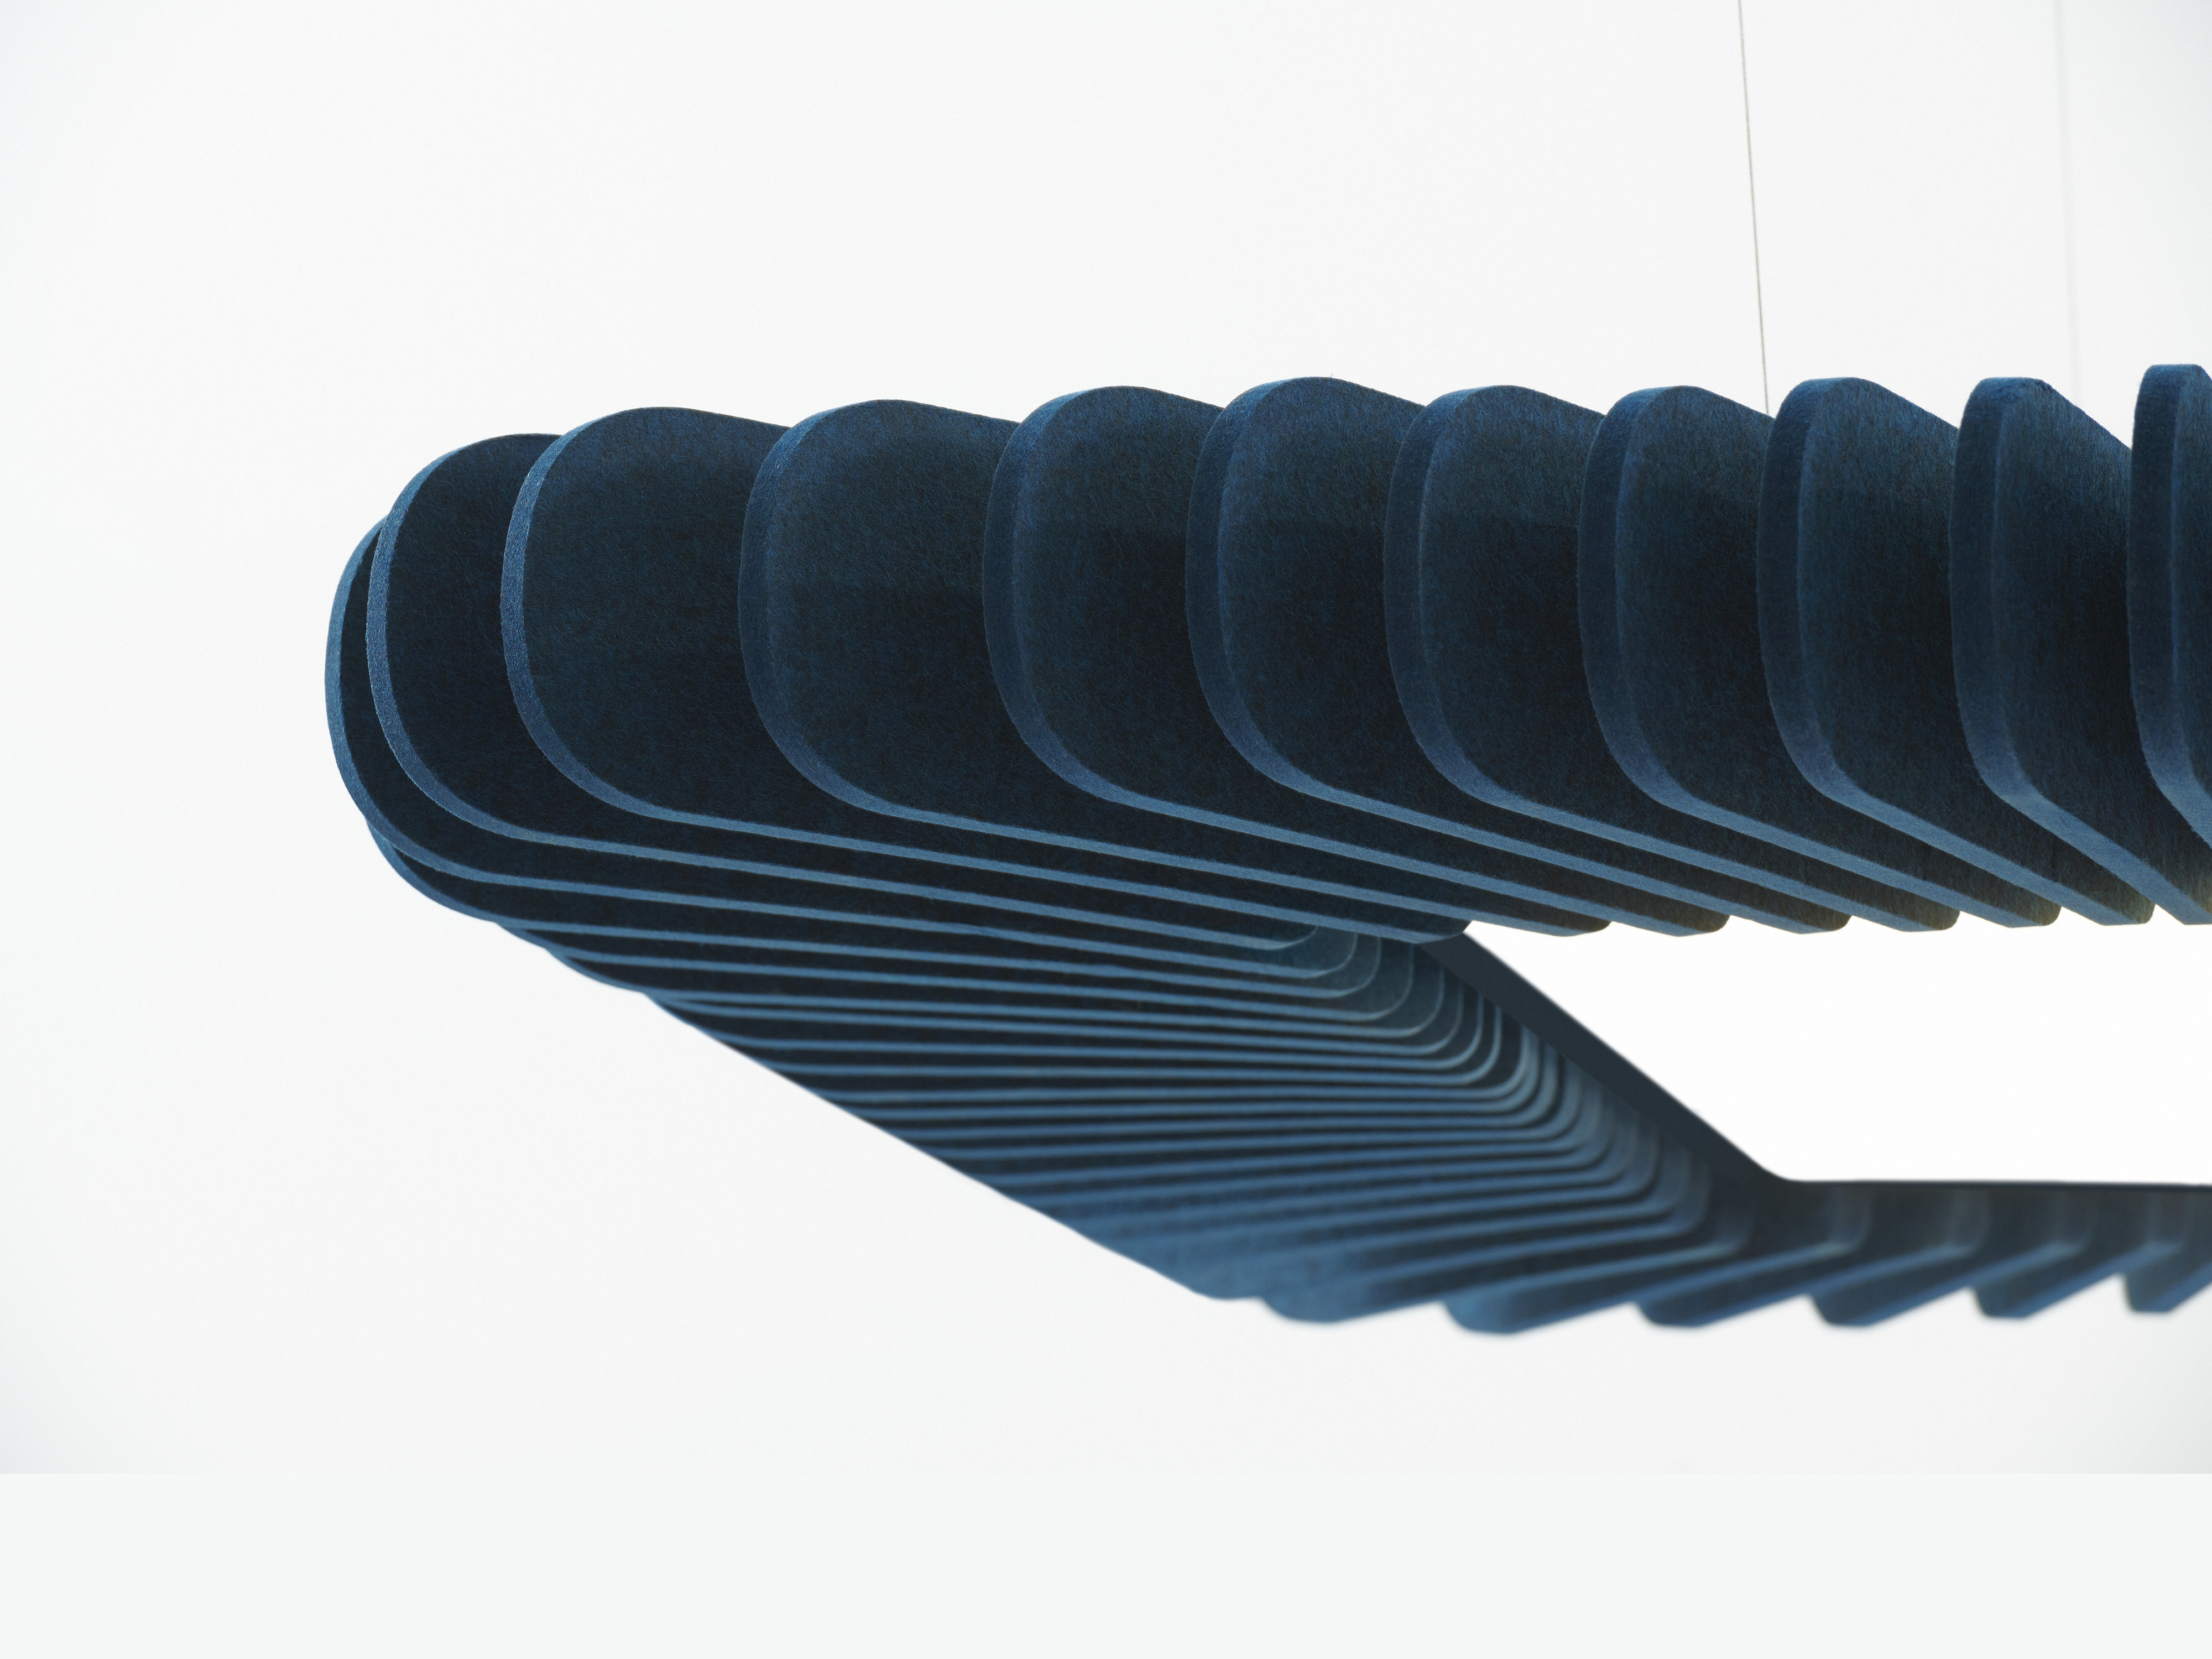 Sol Acoustic Luminaire family